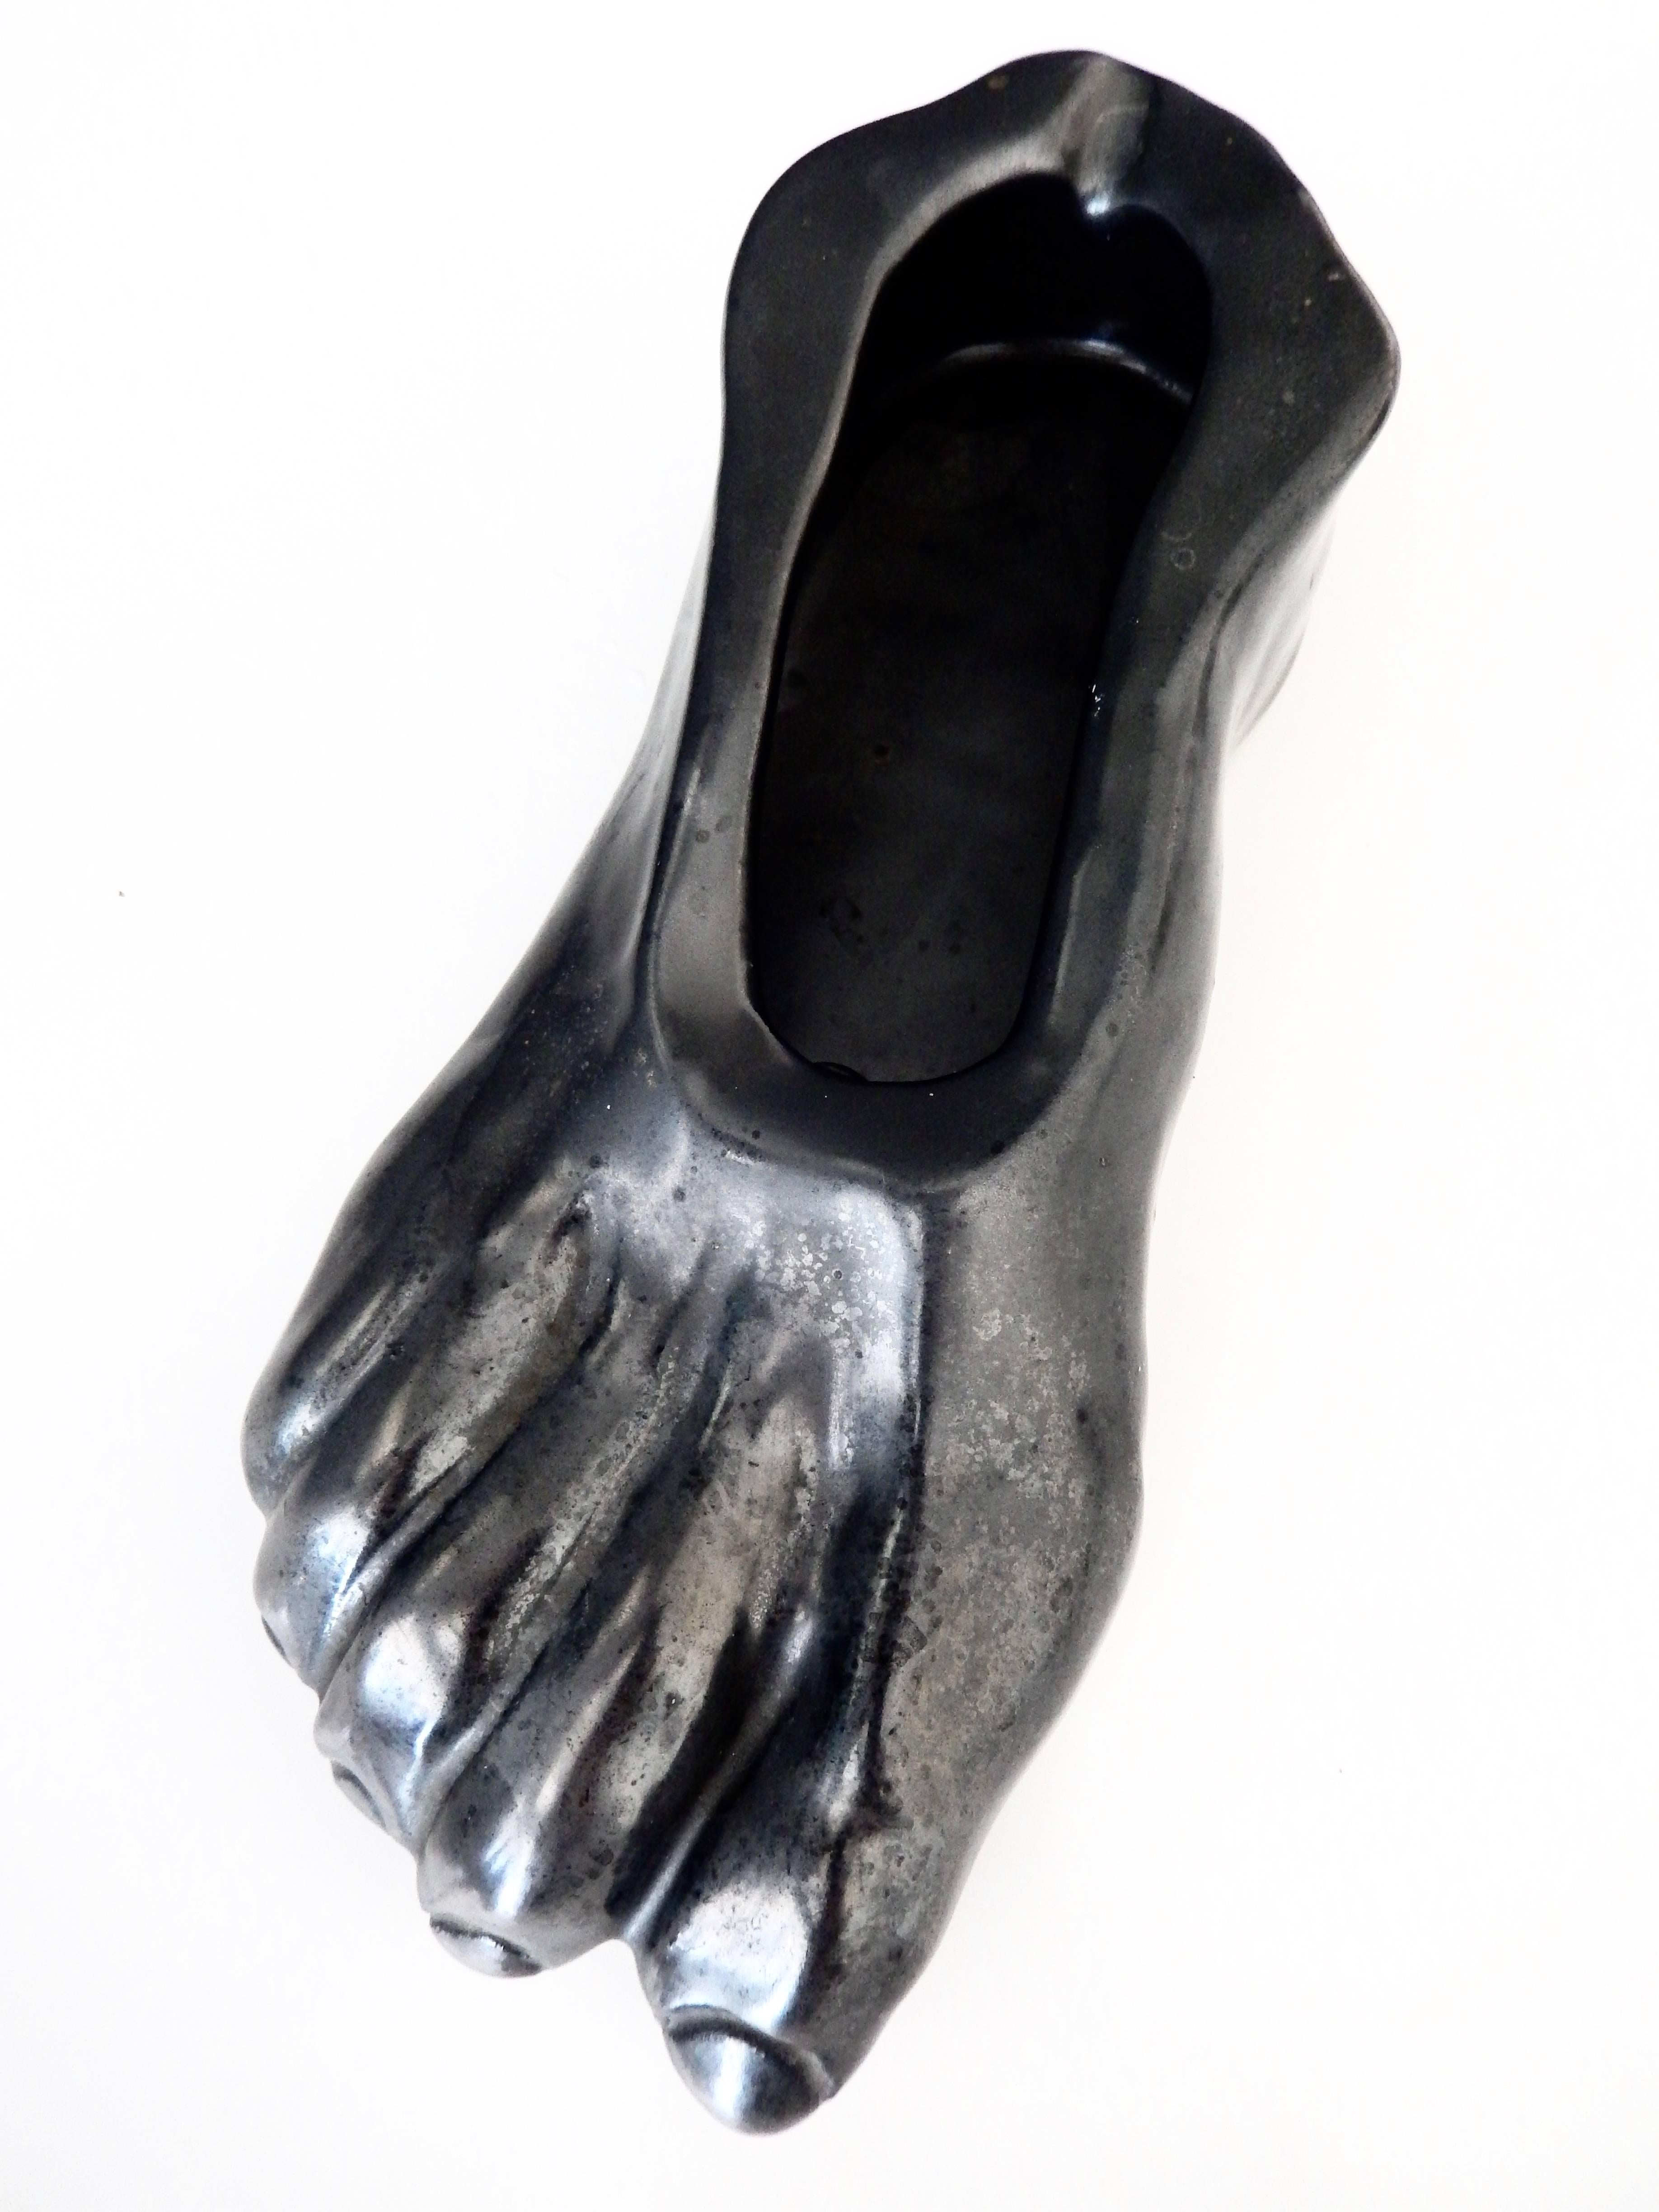 A dramatic ceramic ashtray/sculpture with a rich iridescent black glaze in the shape of a foot by the French artist, director and sculptor Jean Marais (1918-1998). Marais was the muse of Jean Cocteau and this work suggests the strong influence of